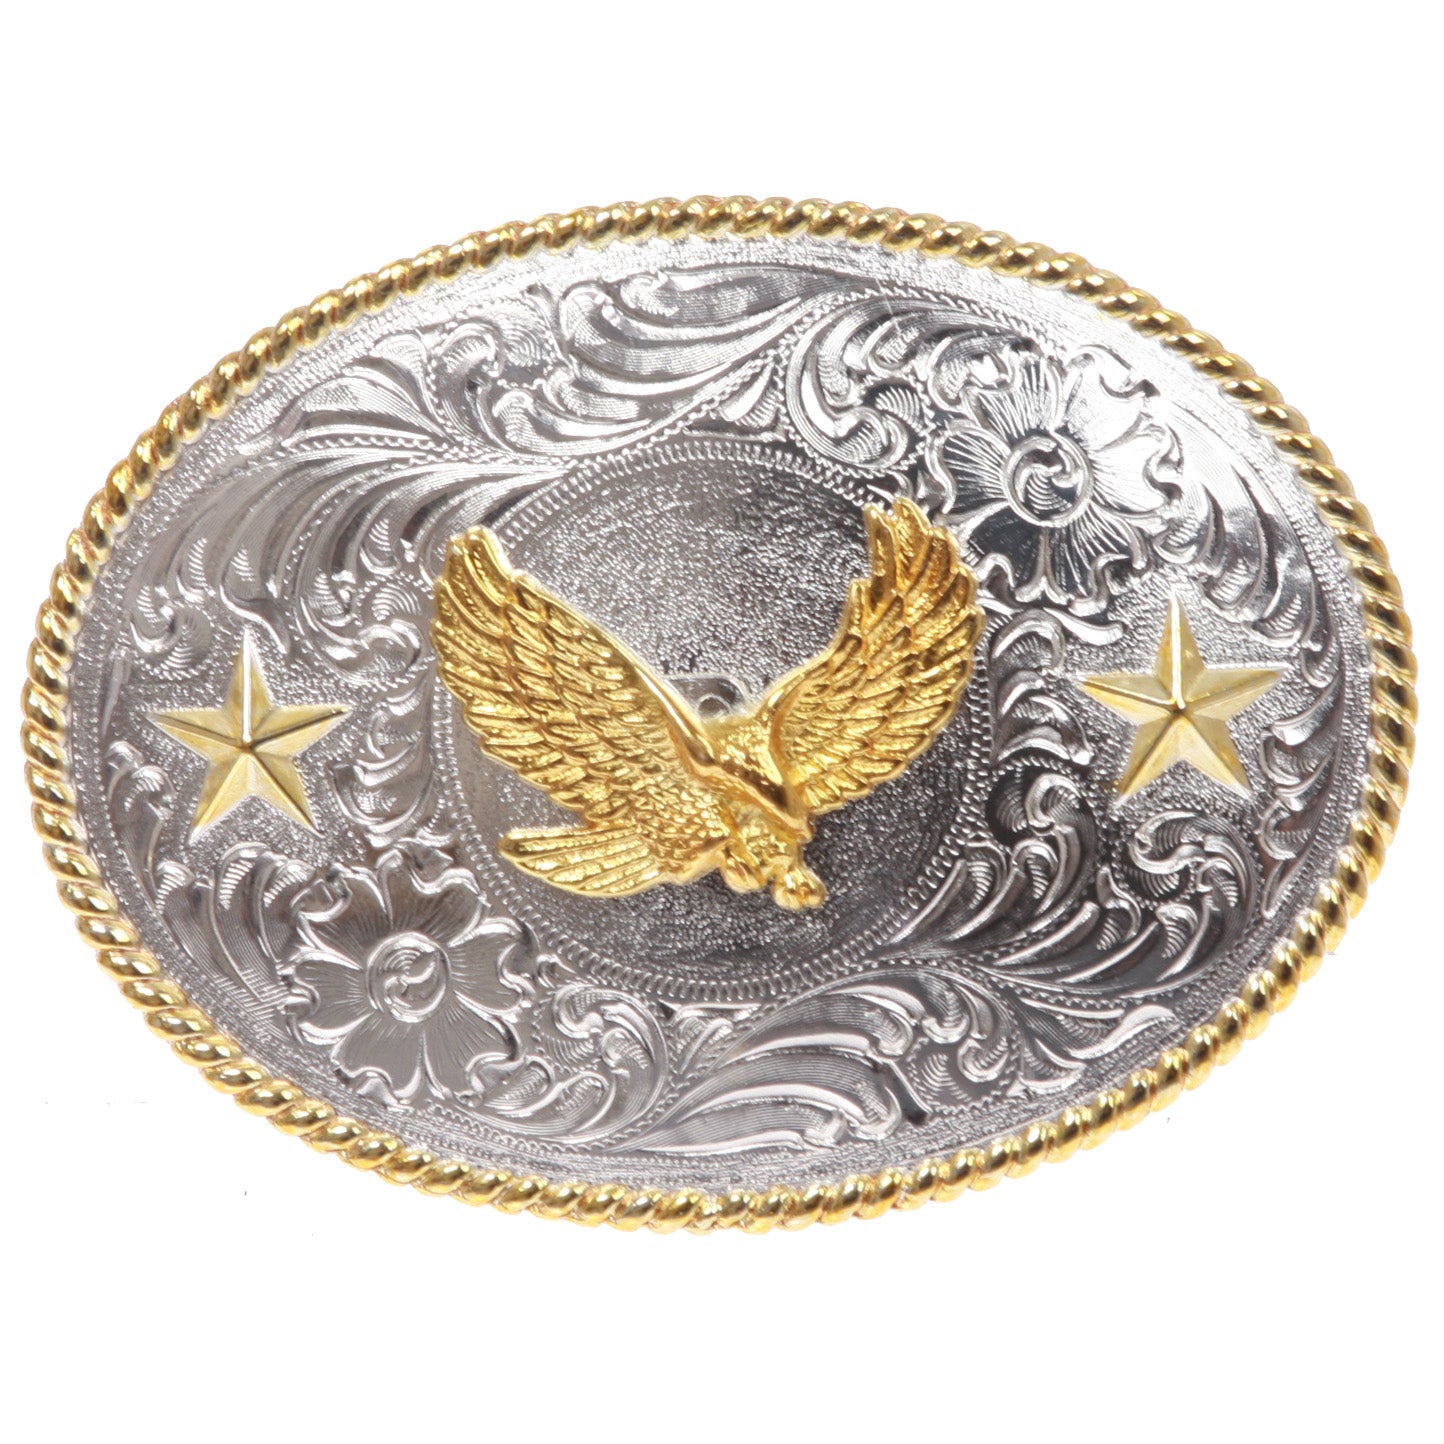 Western Cowboy Silver Buckle with Gold Soaring Eagle Leather Belt